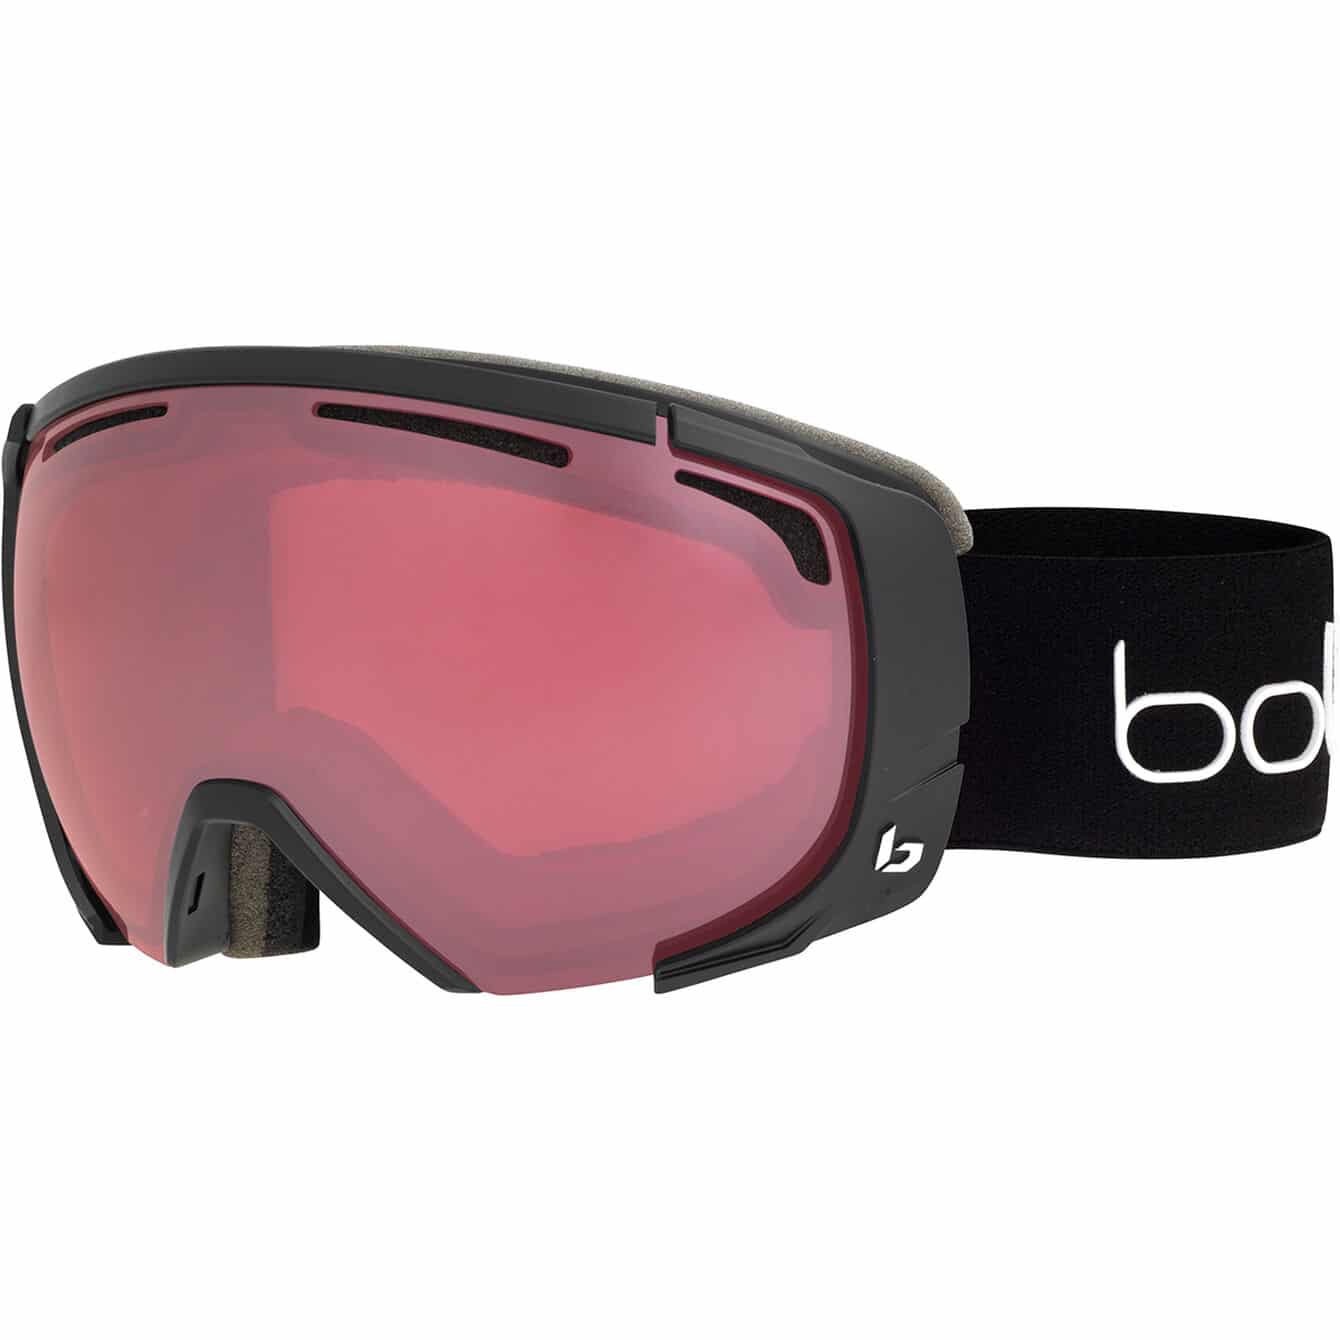 Medium/Large Bollé Sun Protection Supreme OTG  Outdoor Skiing Goggle available in Matte Blue/Yellow 